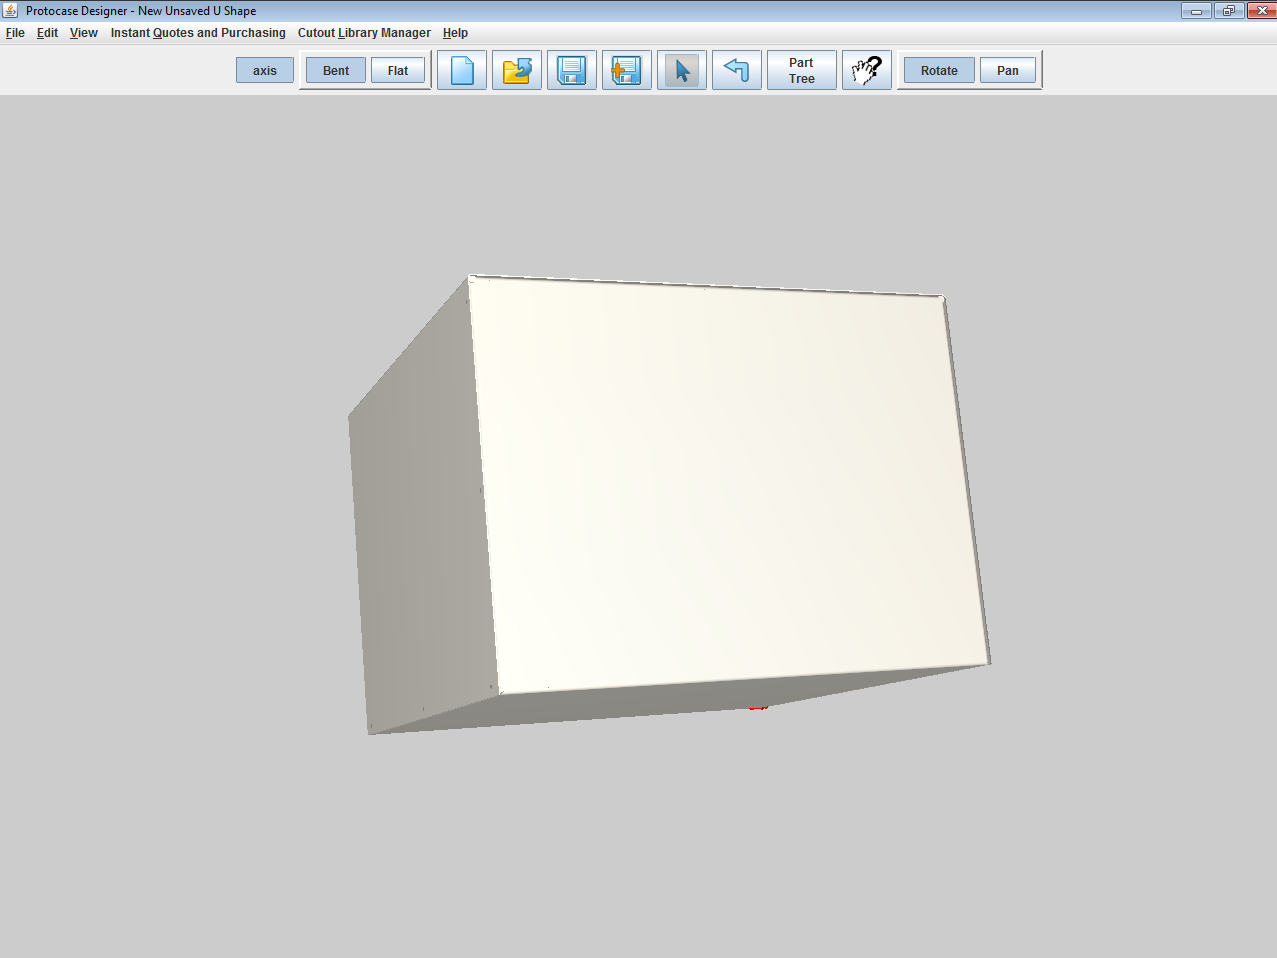 3D View window: U-Shape enclosure, rotated to show rear face